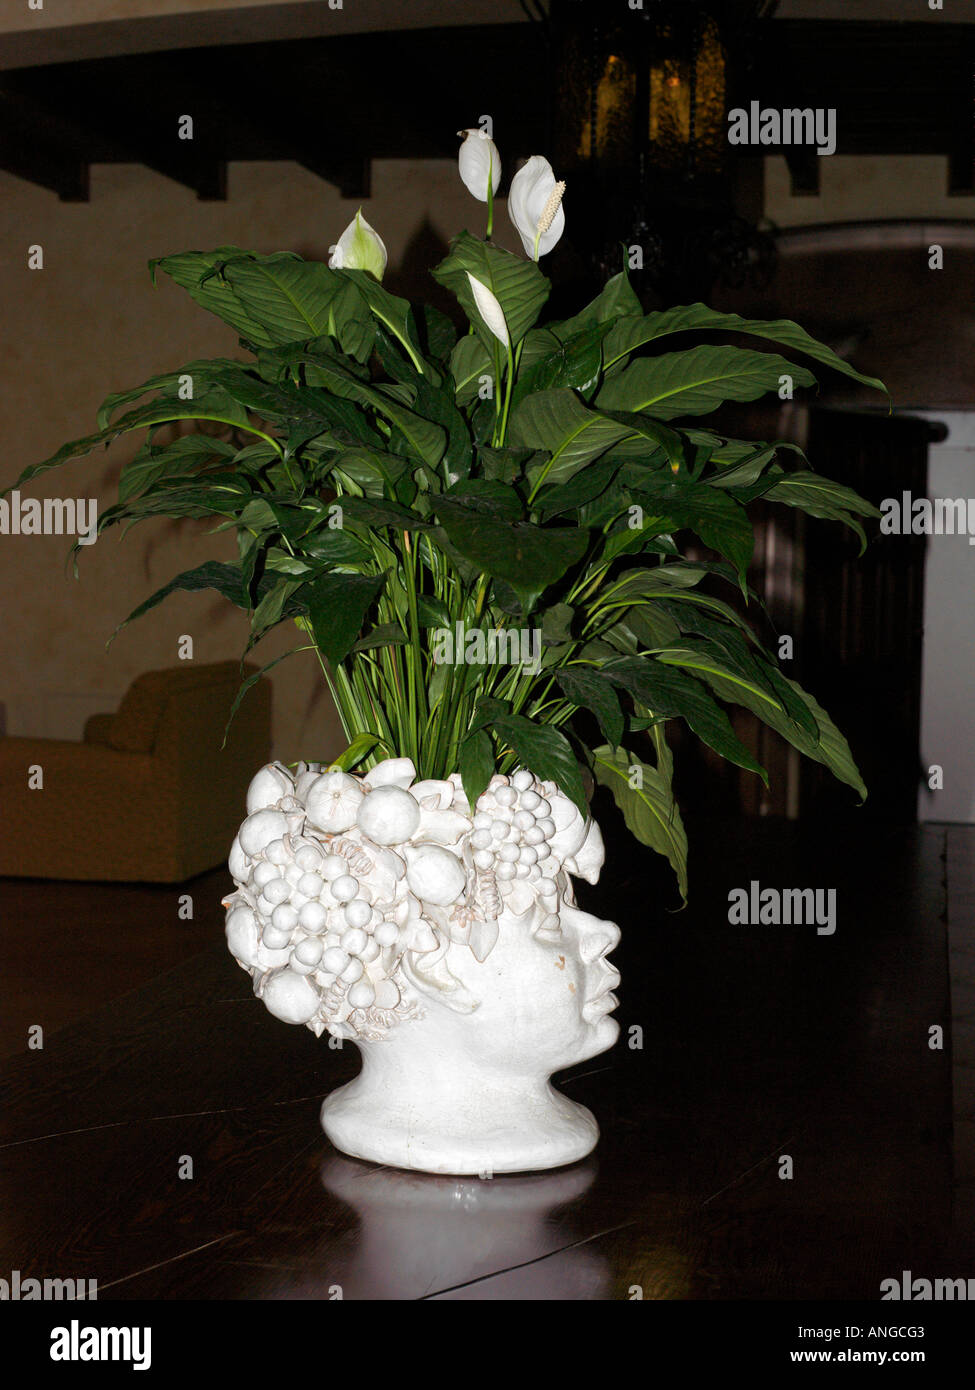 Palermo Sicily Italy Genoardo Park Hotel White Easter Lilies in a Typical Porcelain Head Vase Stock Photo